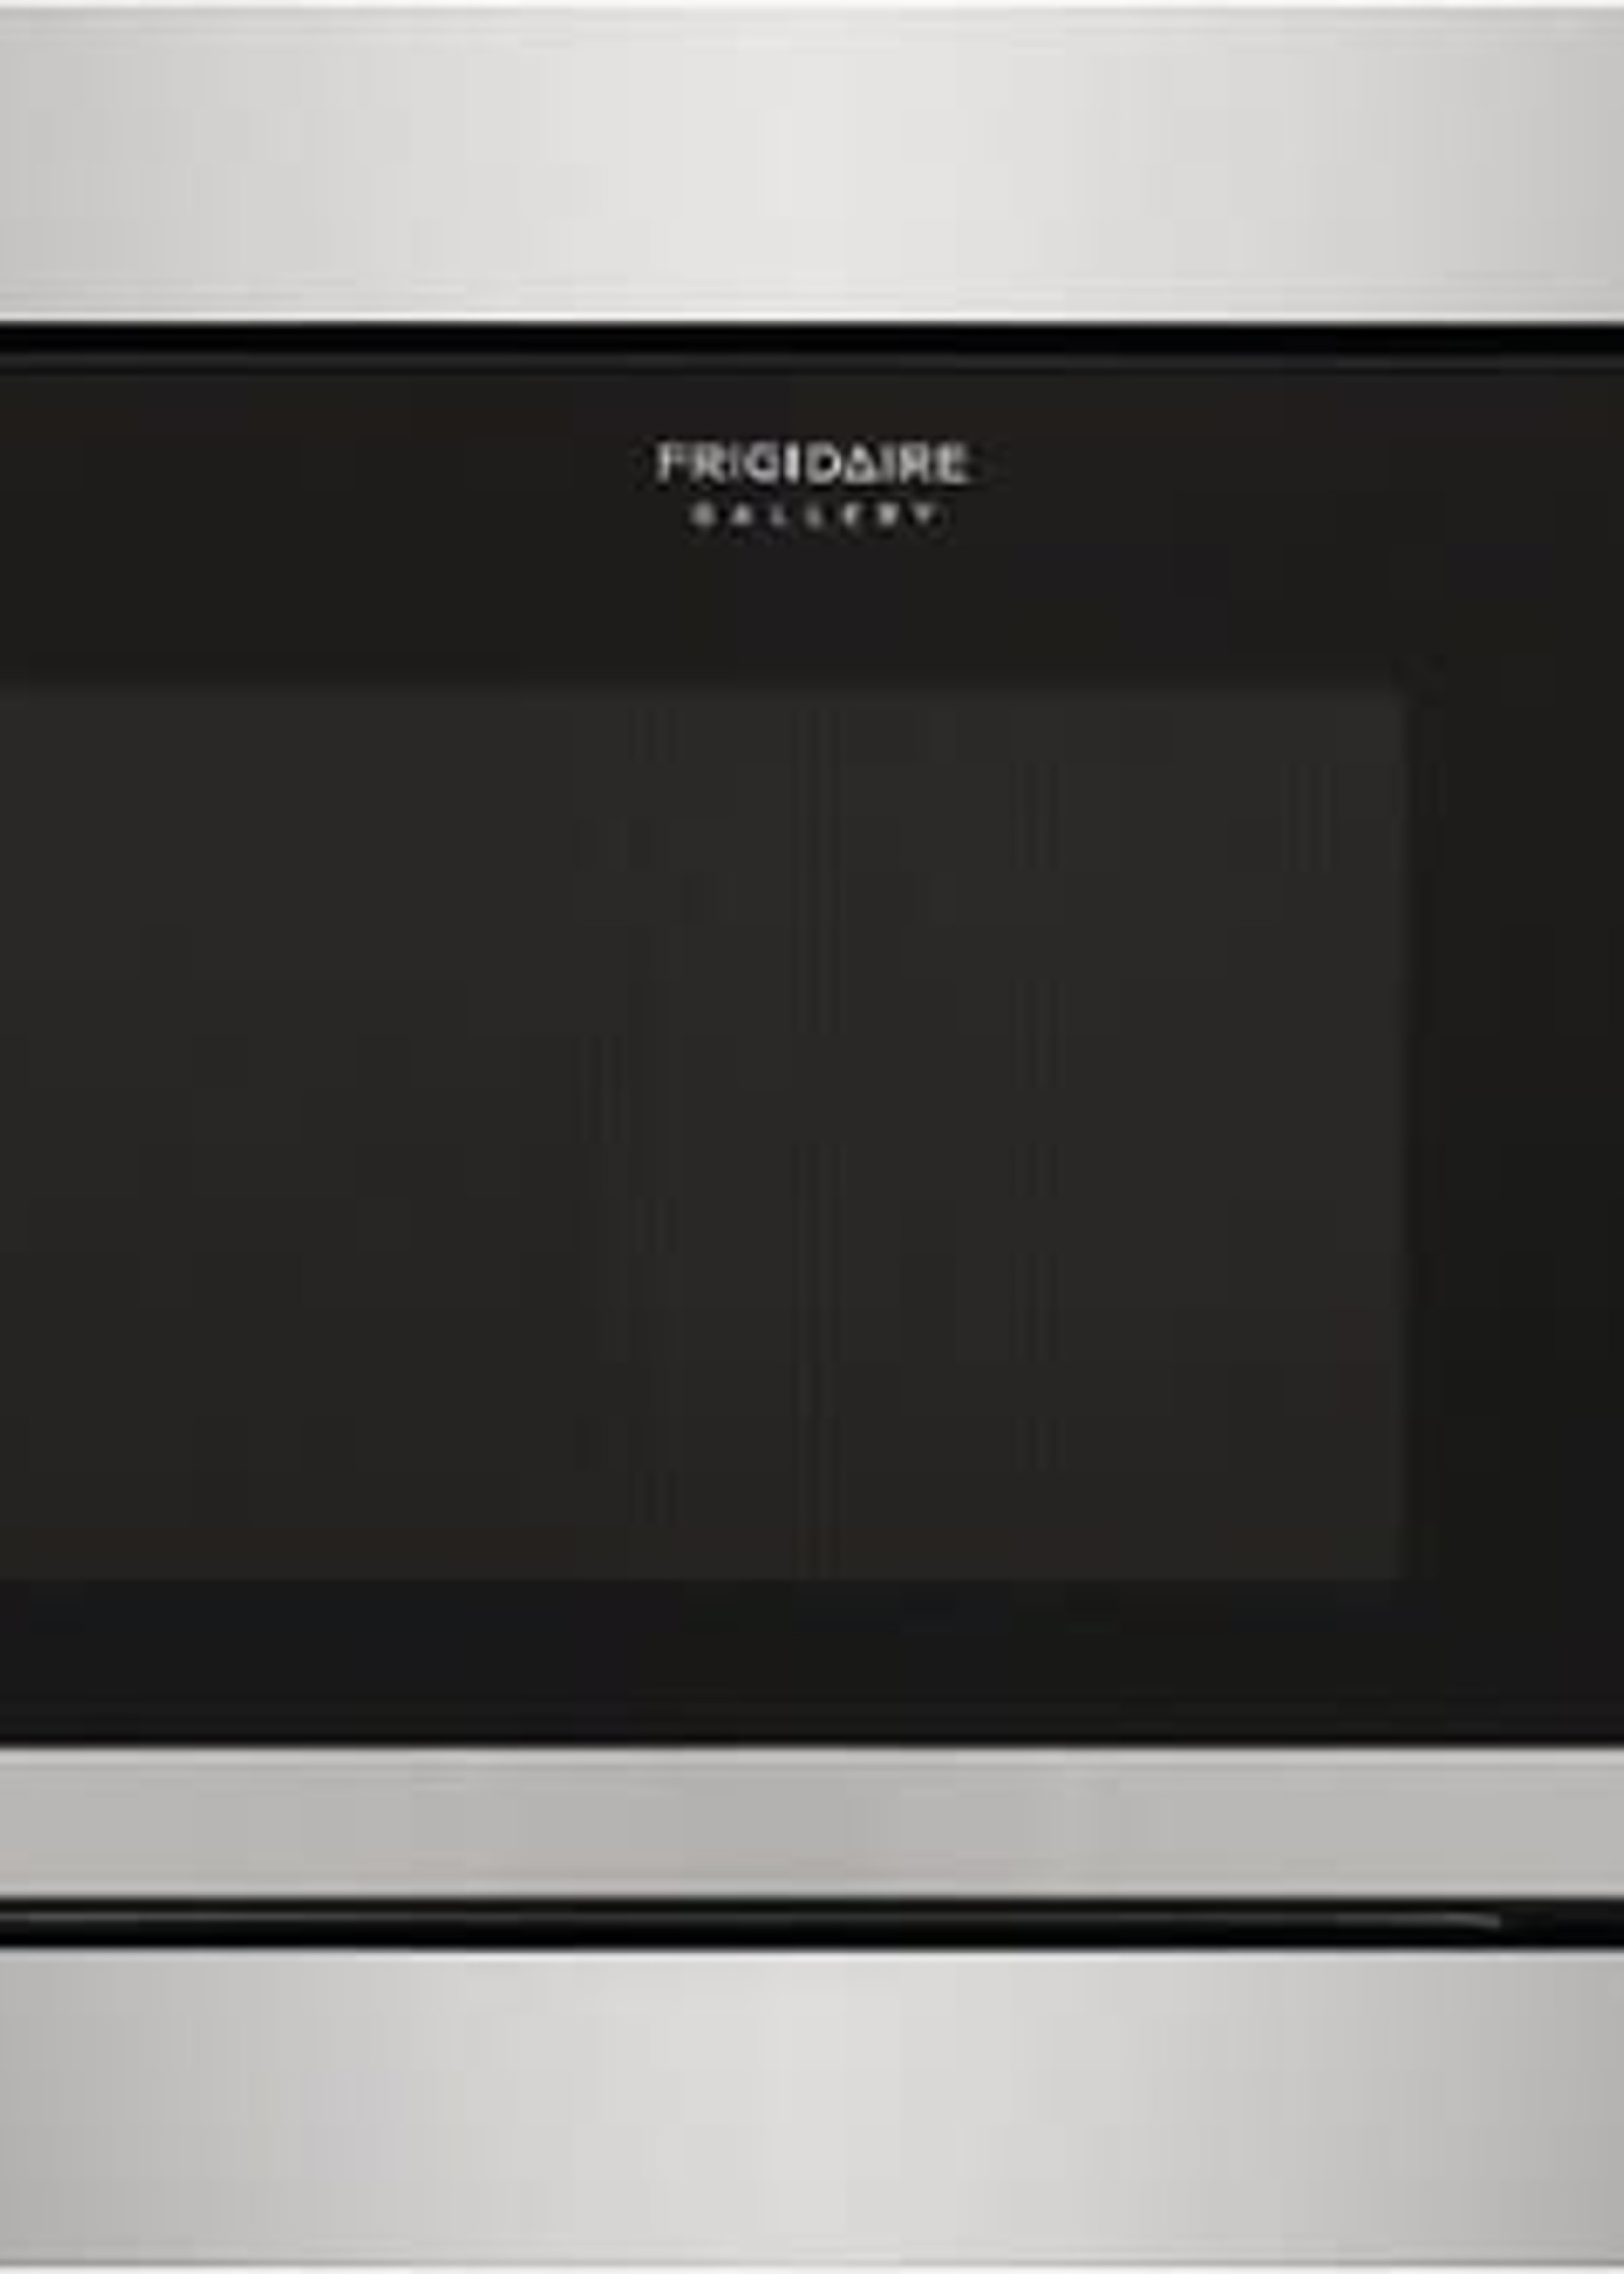 Frigidaire *Frigidaire GMBS3068AF  2.2-cu ft 1100-Watt Built-In Microwave with Sensor Cooking Controls (Smudge-proof Stainless Steel)